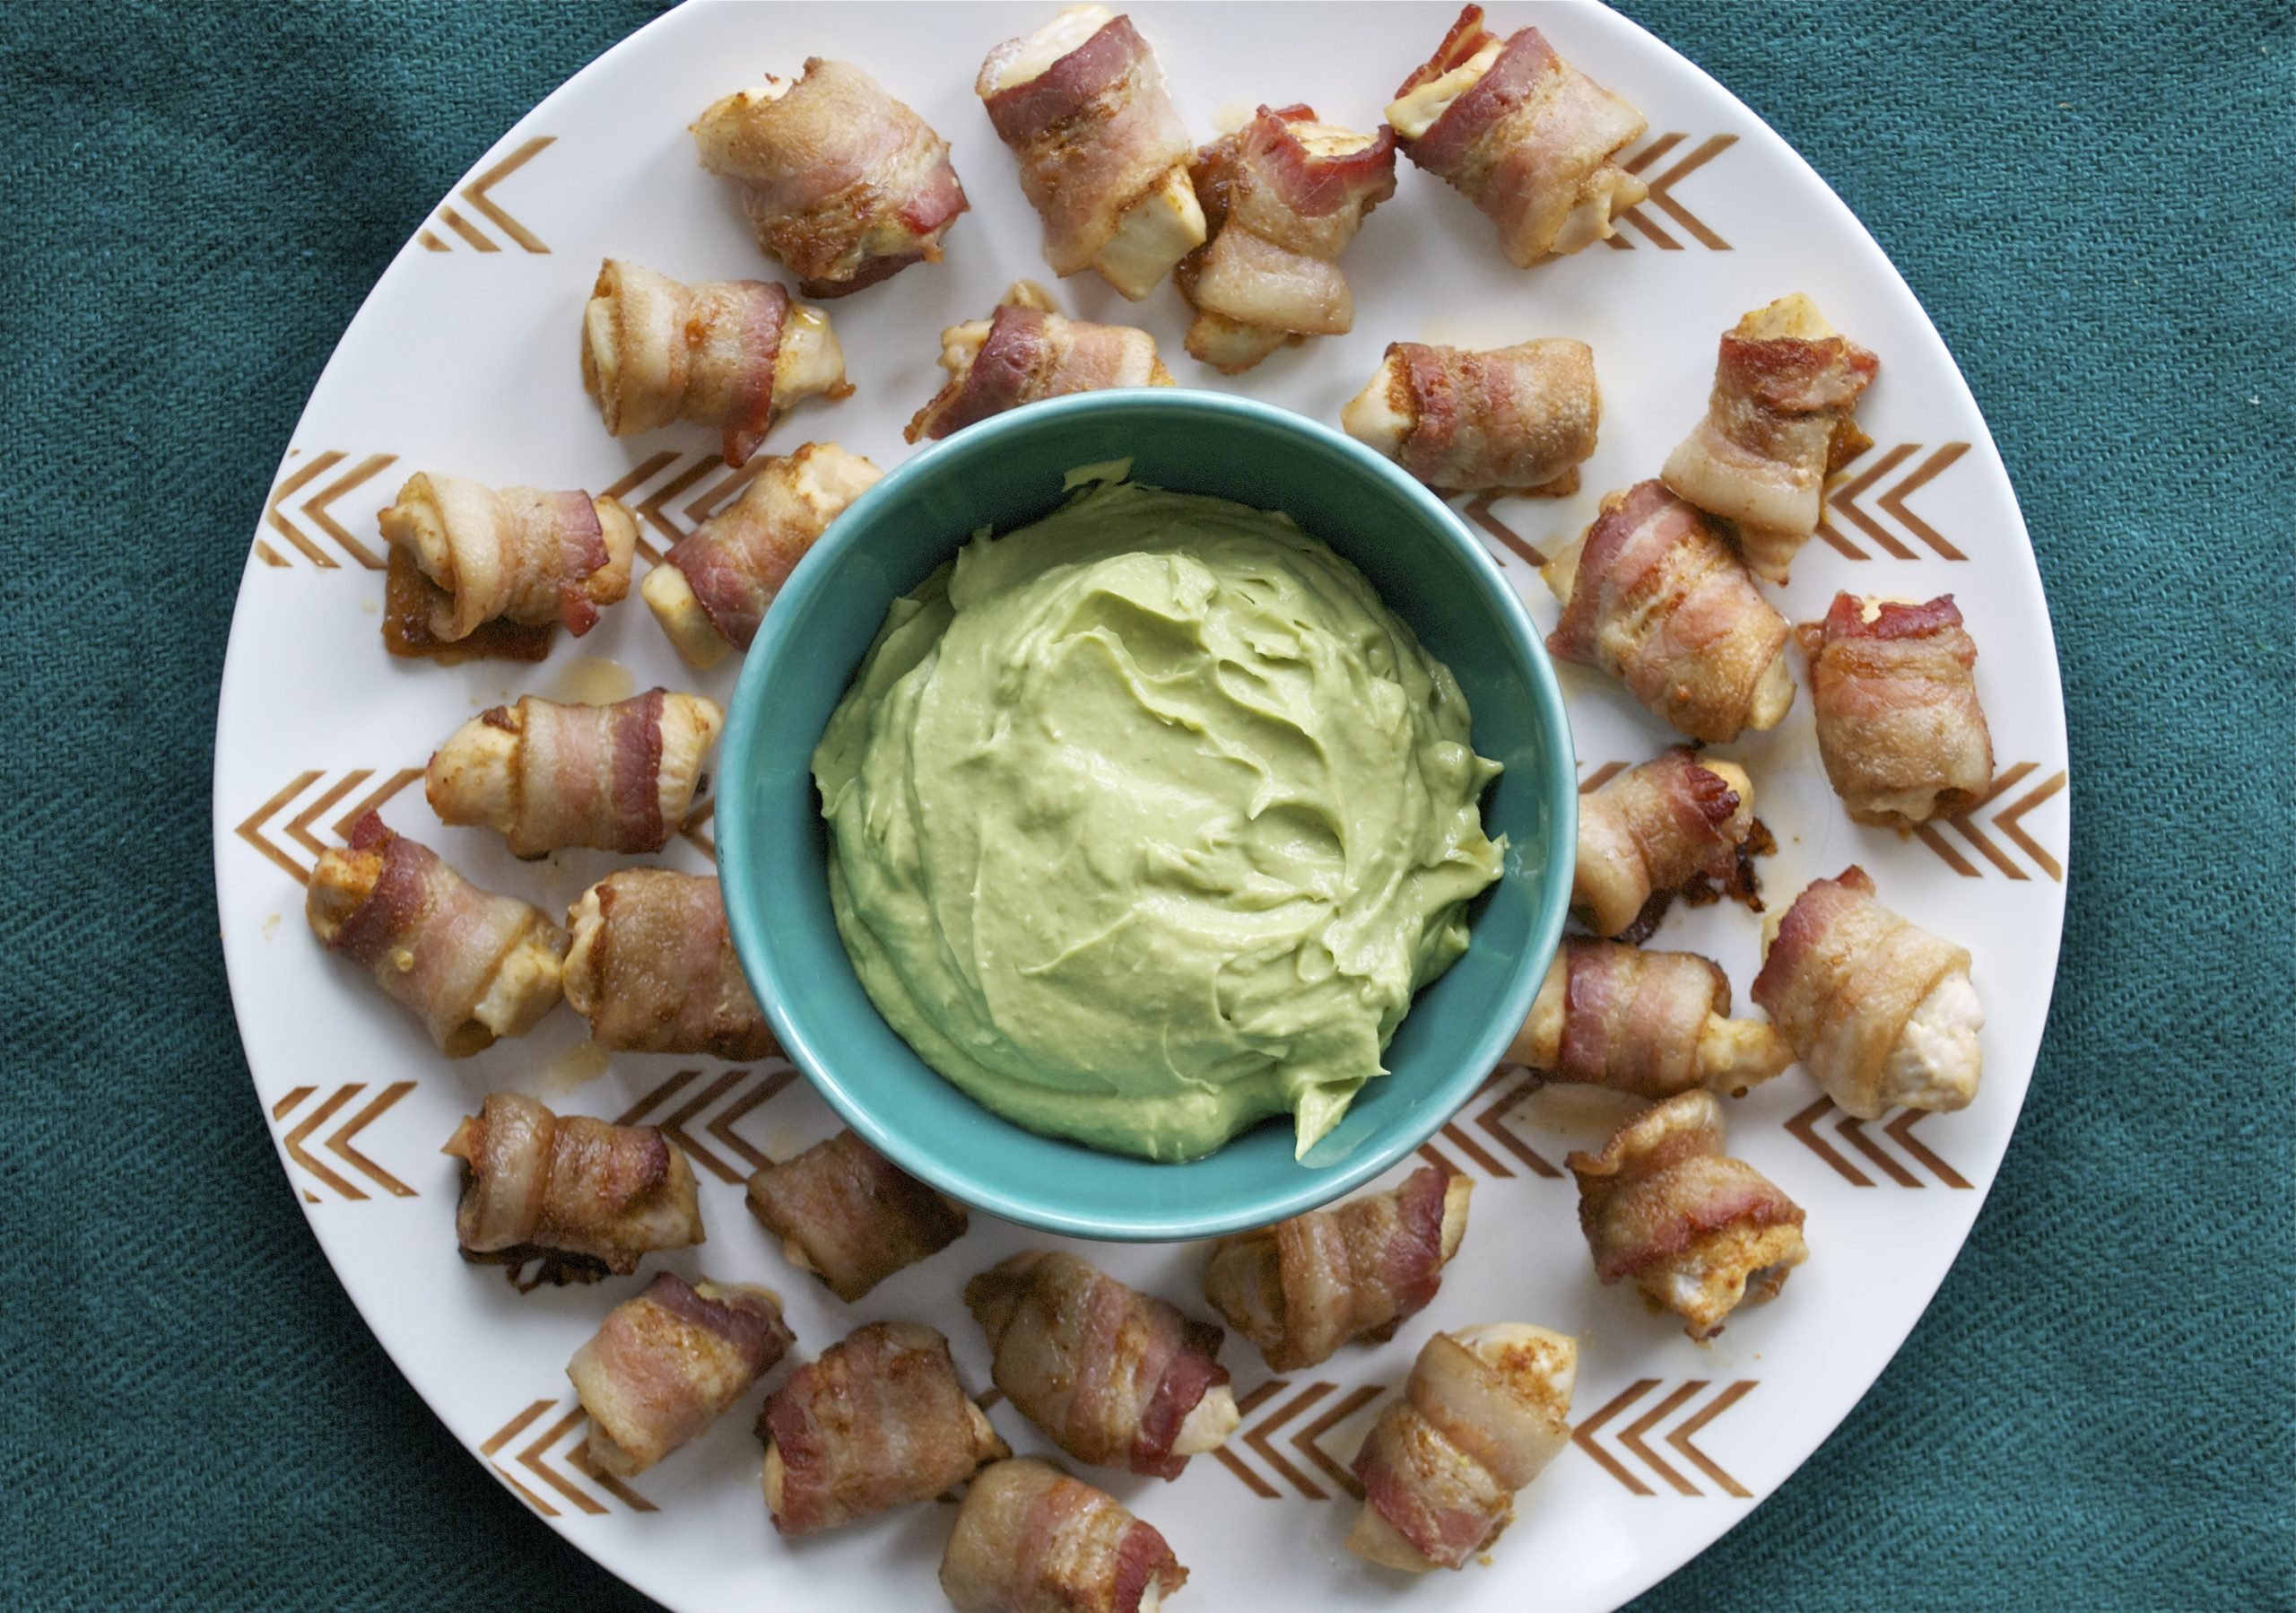 Bacon Wrapped Chicken Bites with Avocado Dipping Sauce